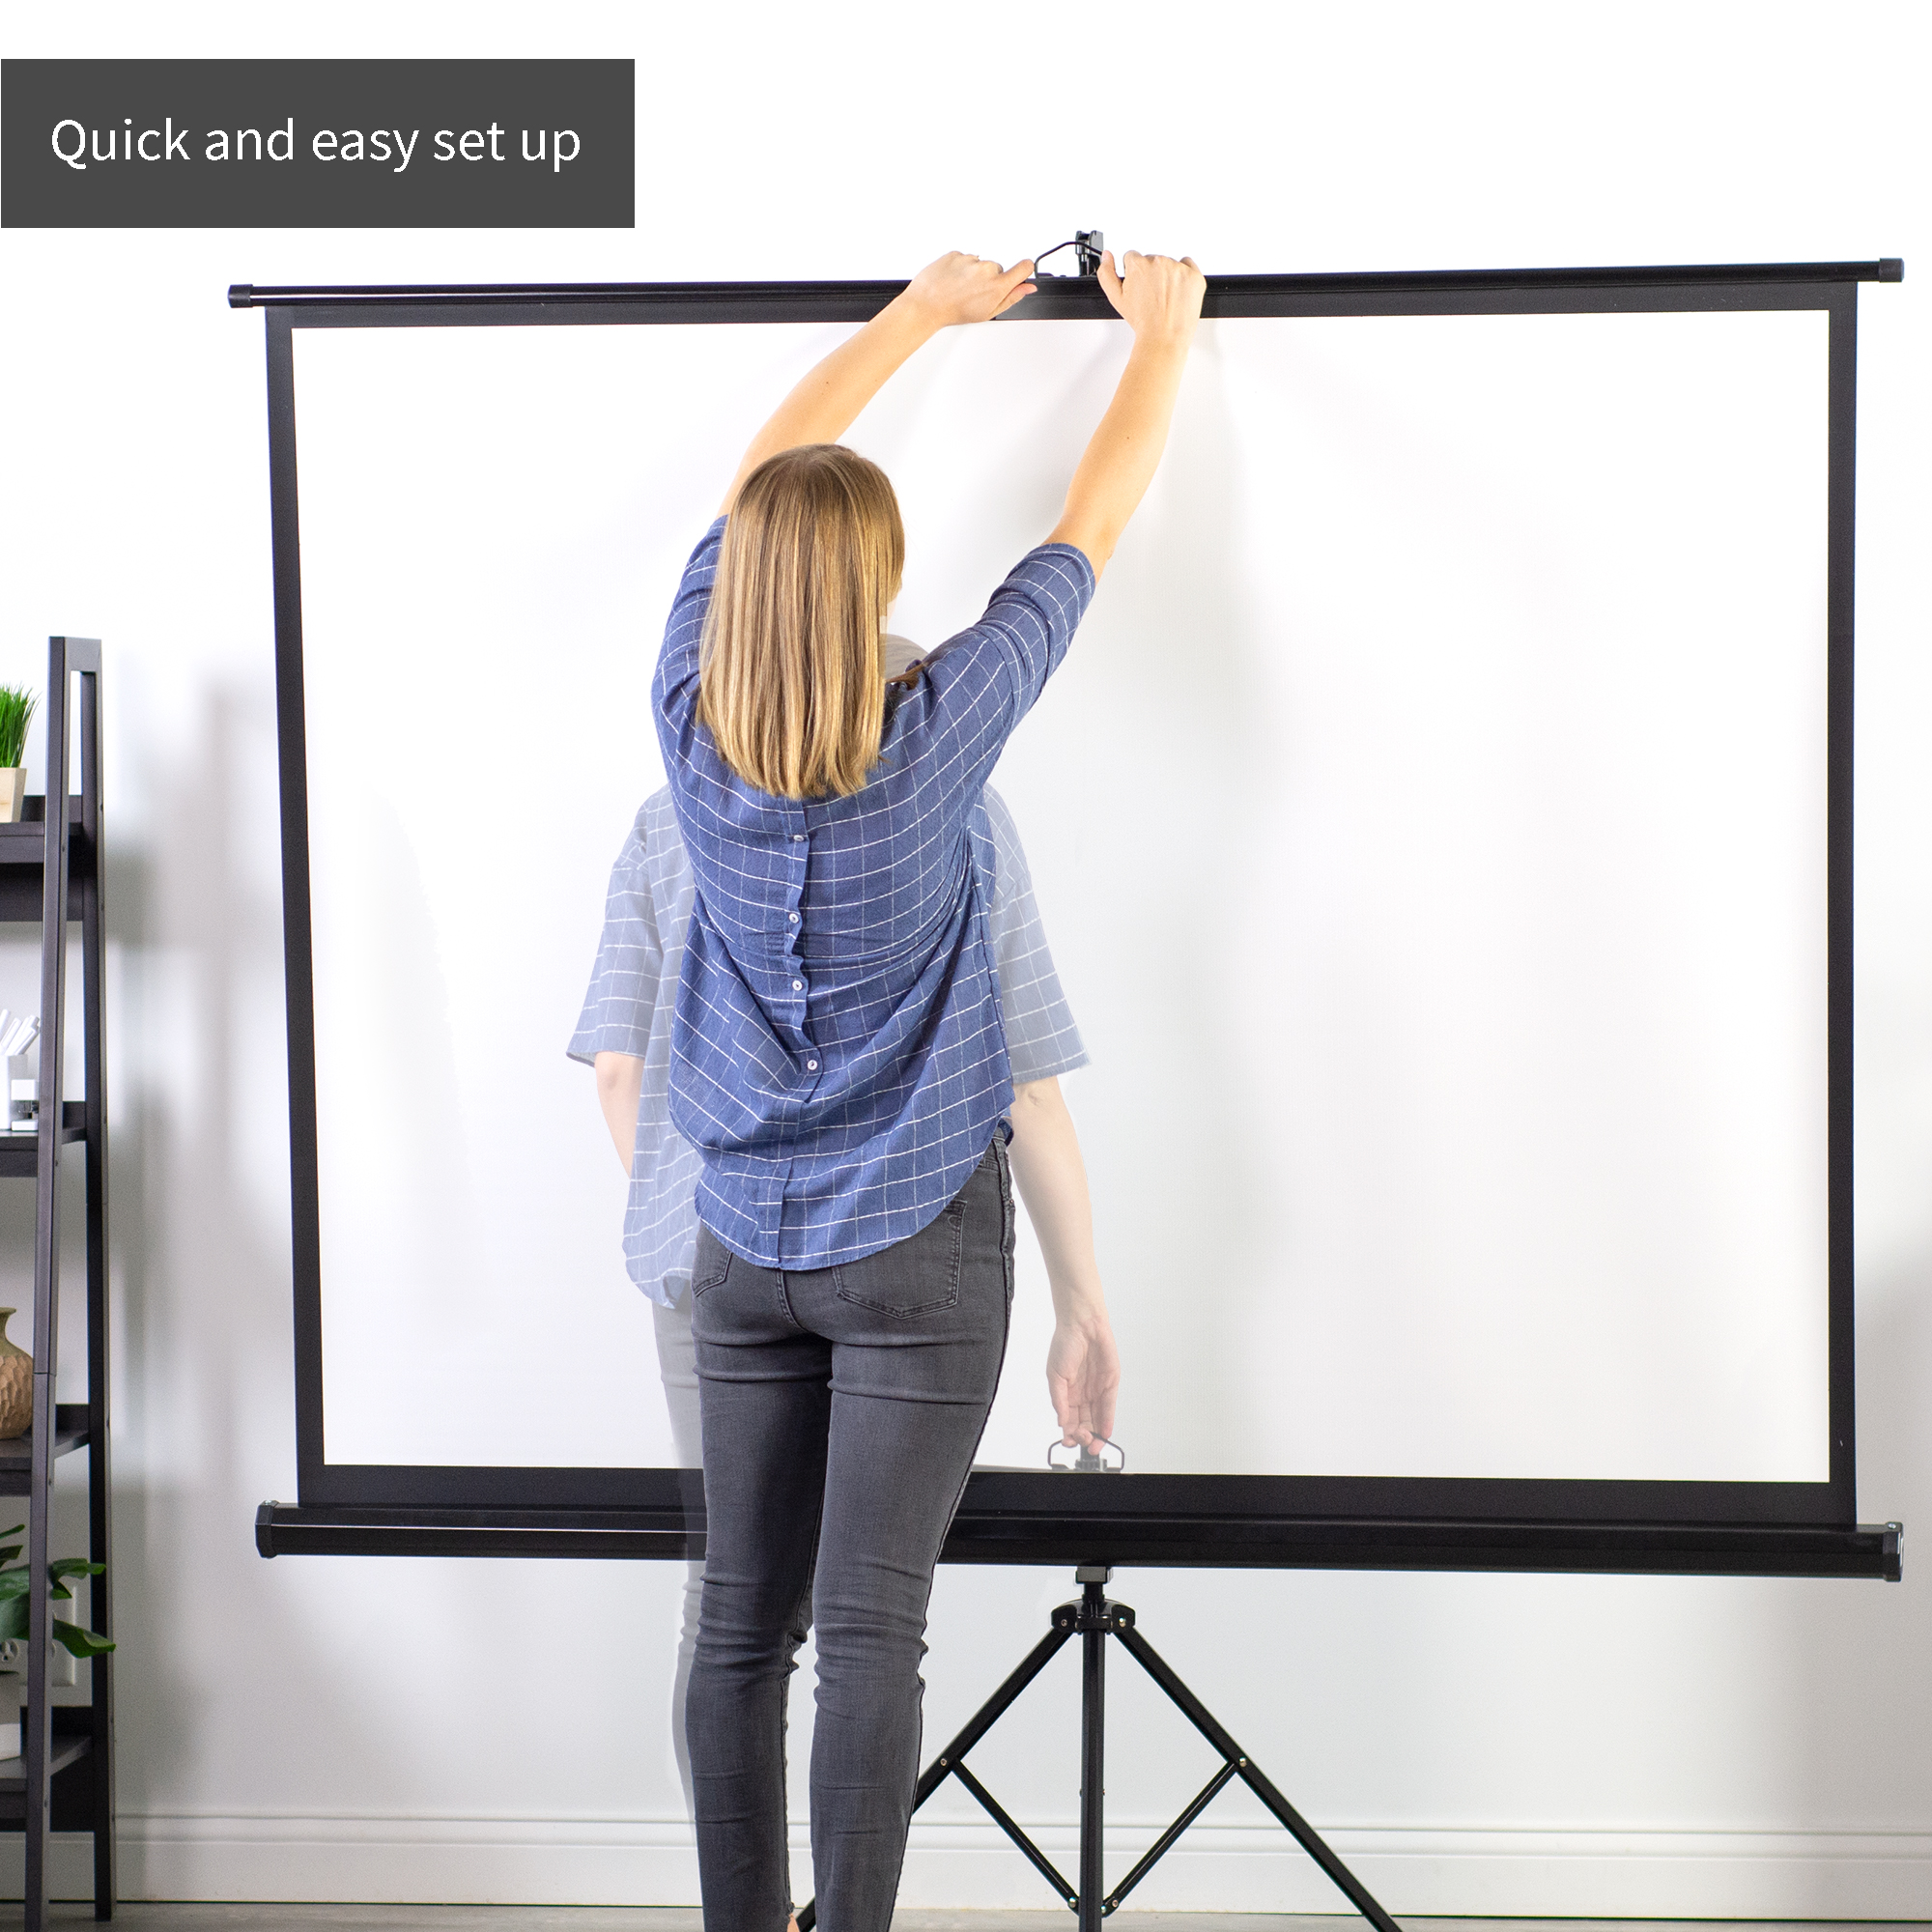 VIVO 100" Portable Projector Screen 4:3 Projection Pull Up Foldable Stand Tripod - image 4 of 6